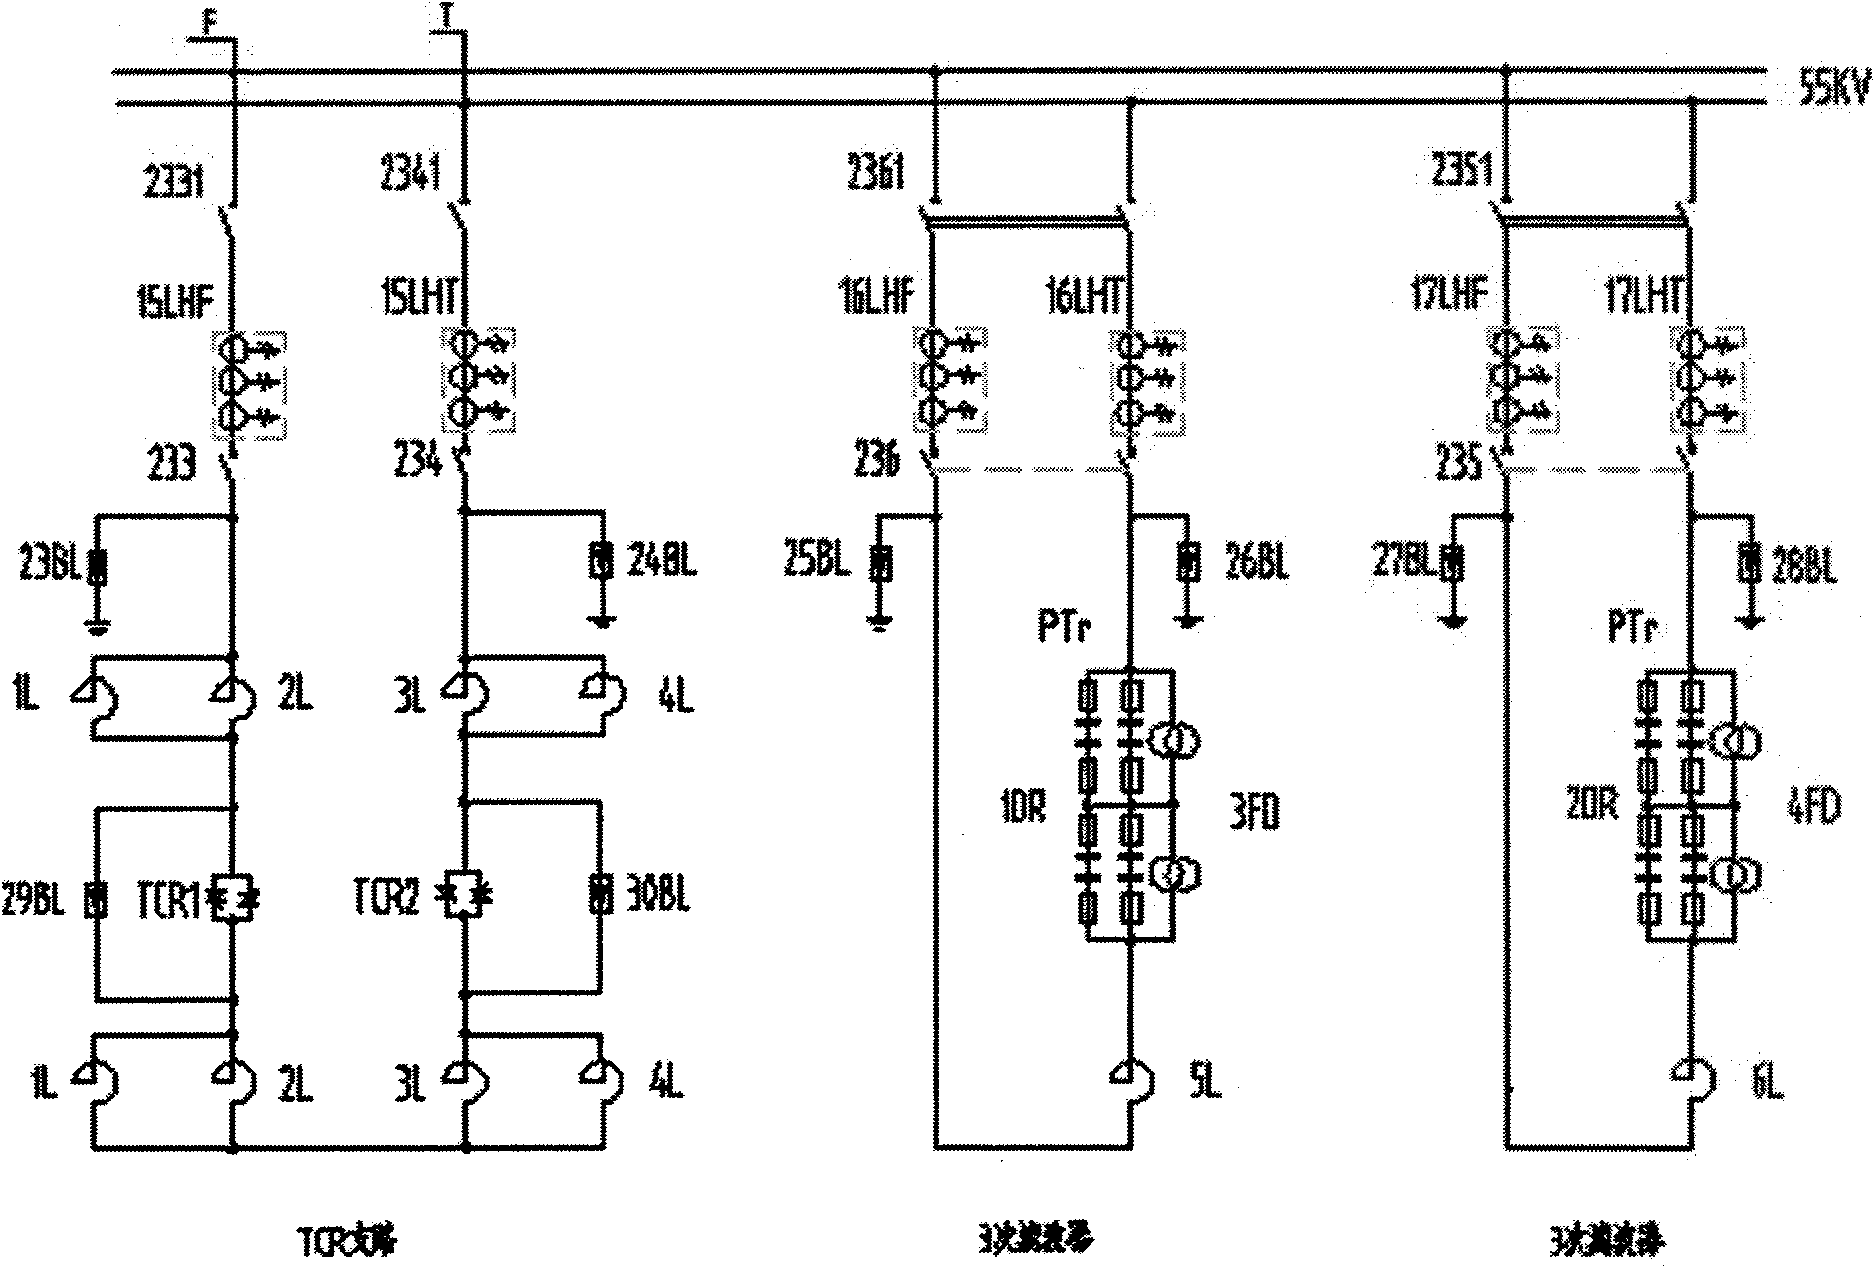 Method and device for improving supply voltage at tail end of long supply arm of heavy haul railway